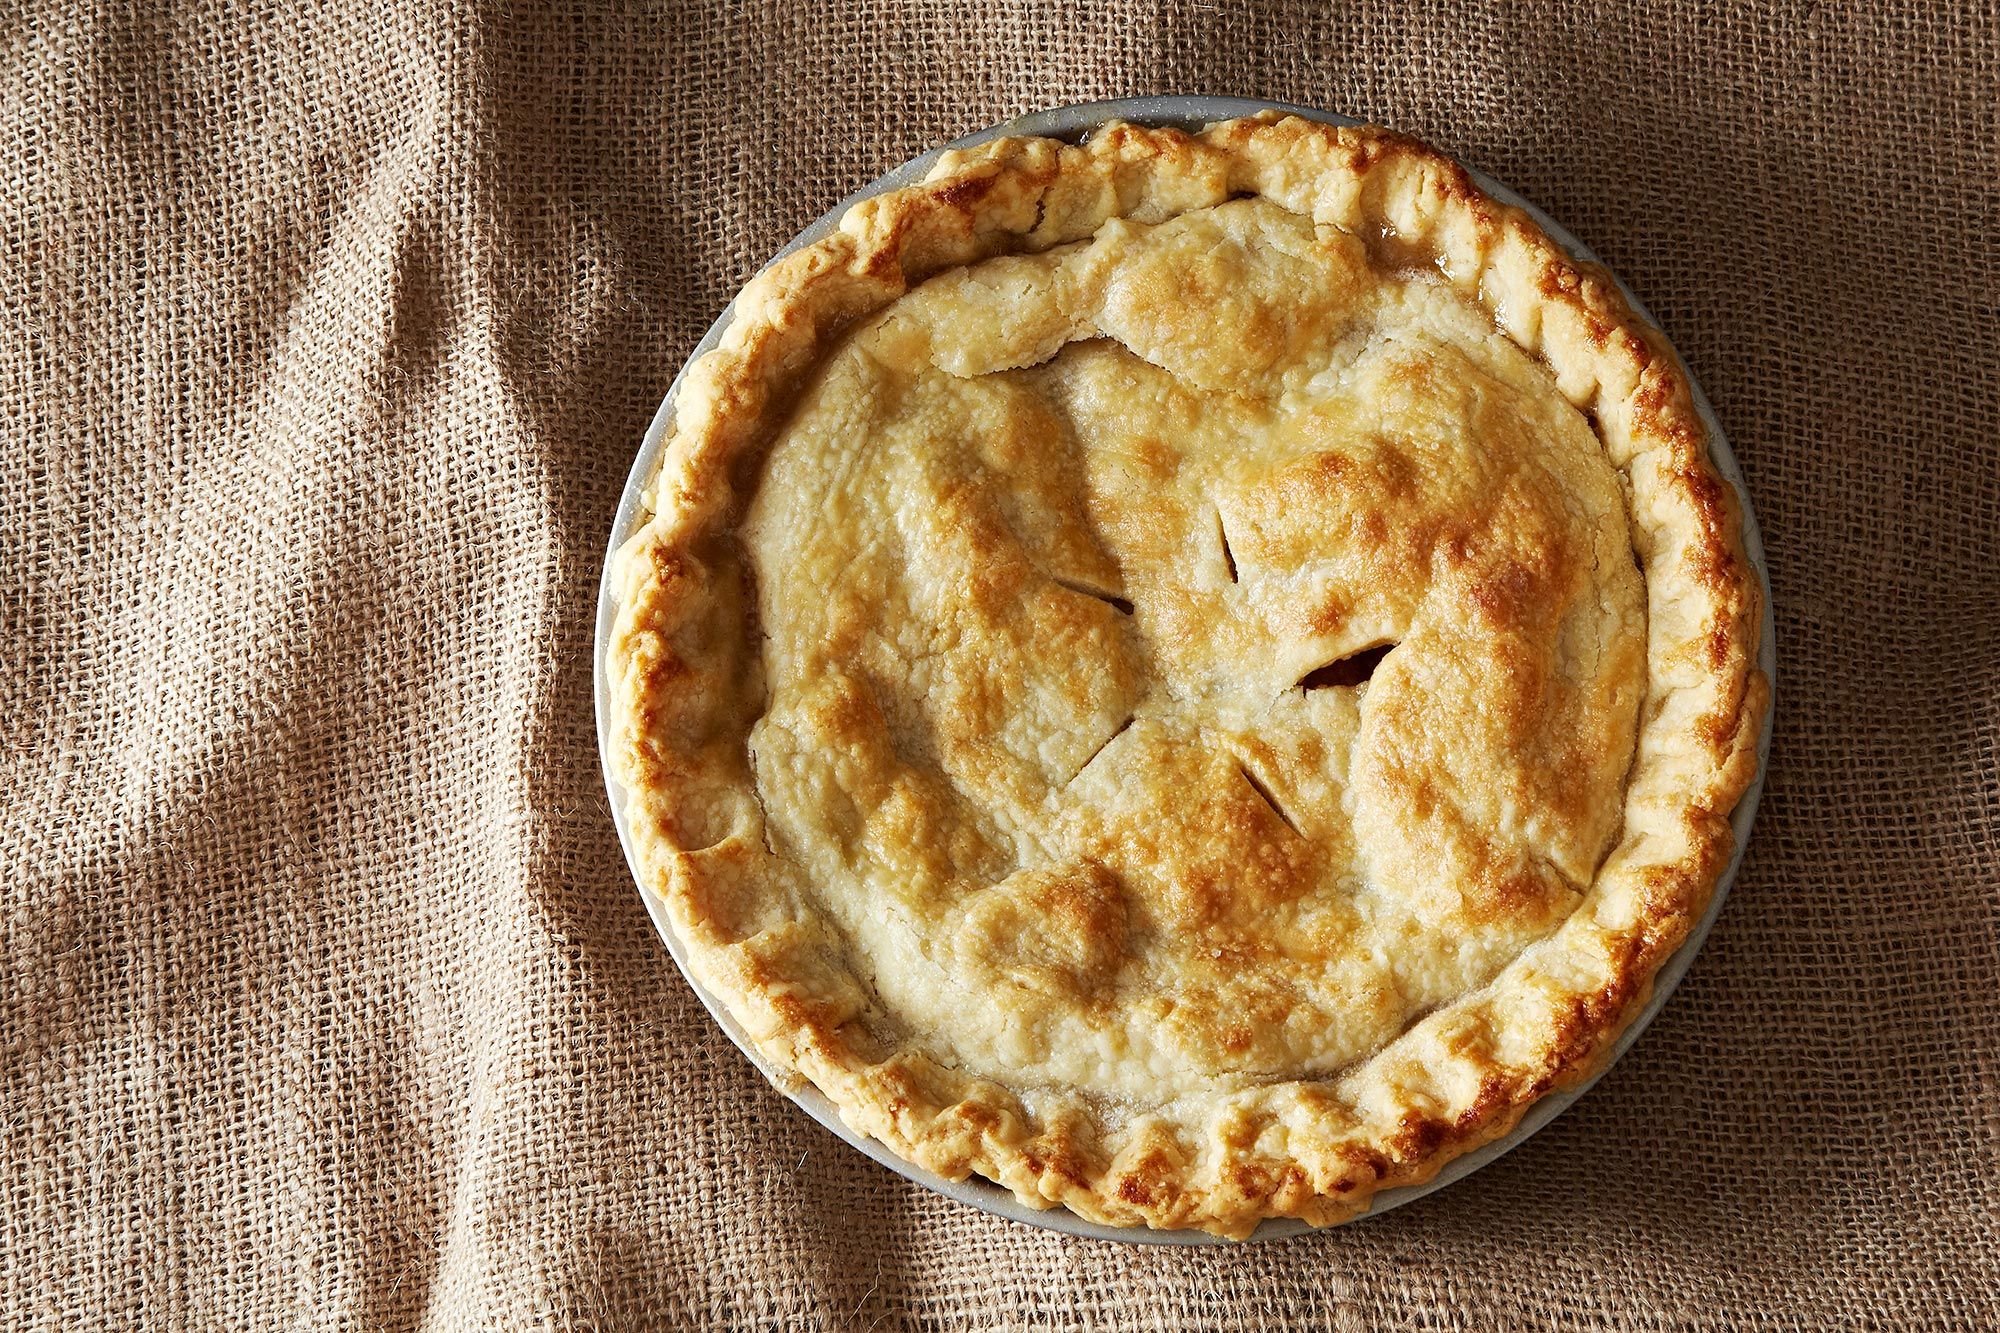 Apple pie from Food52